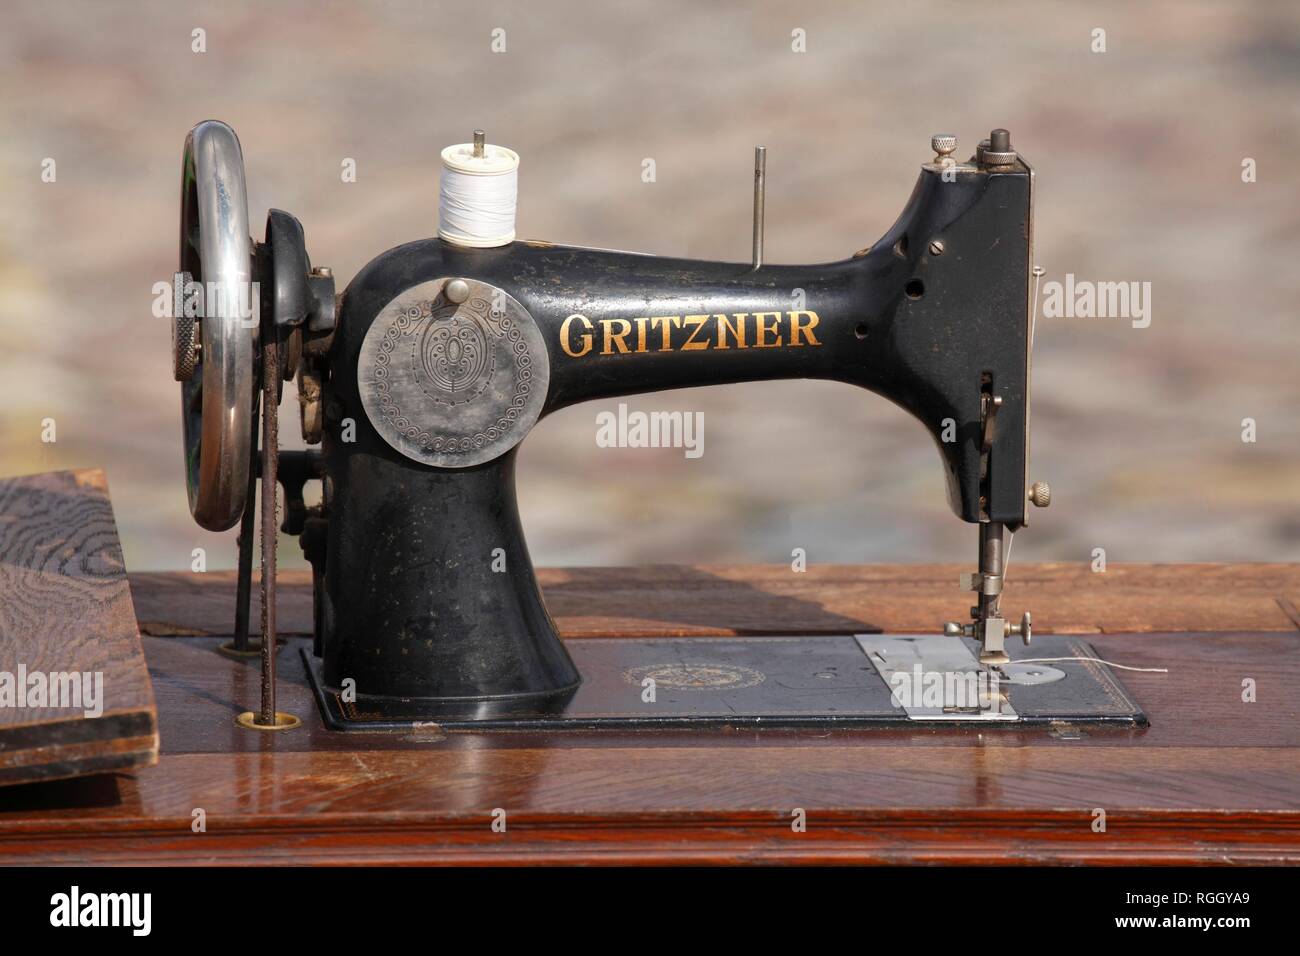 Old Gritzner sewing machine, Germany Stock Photo